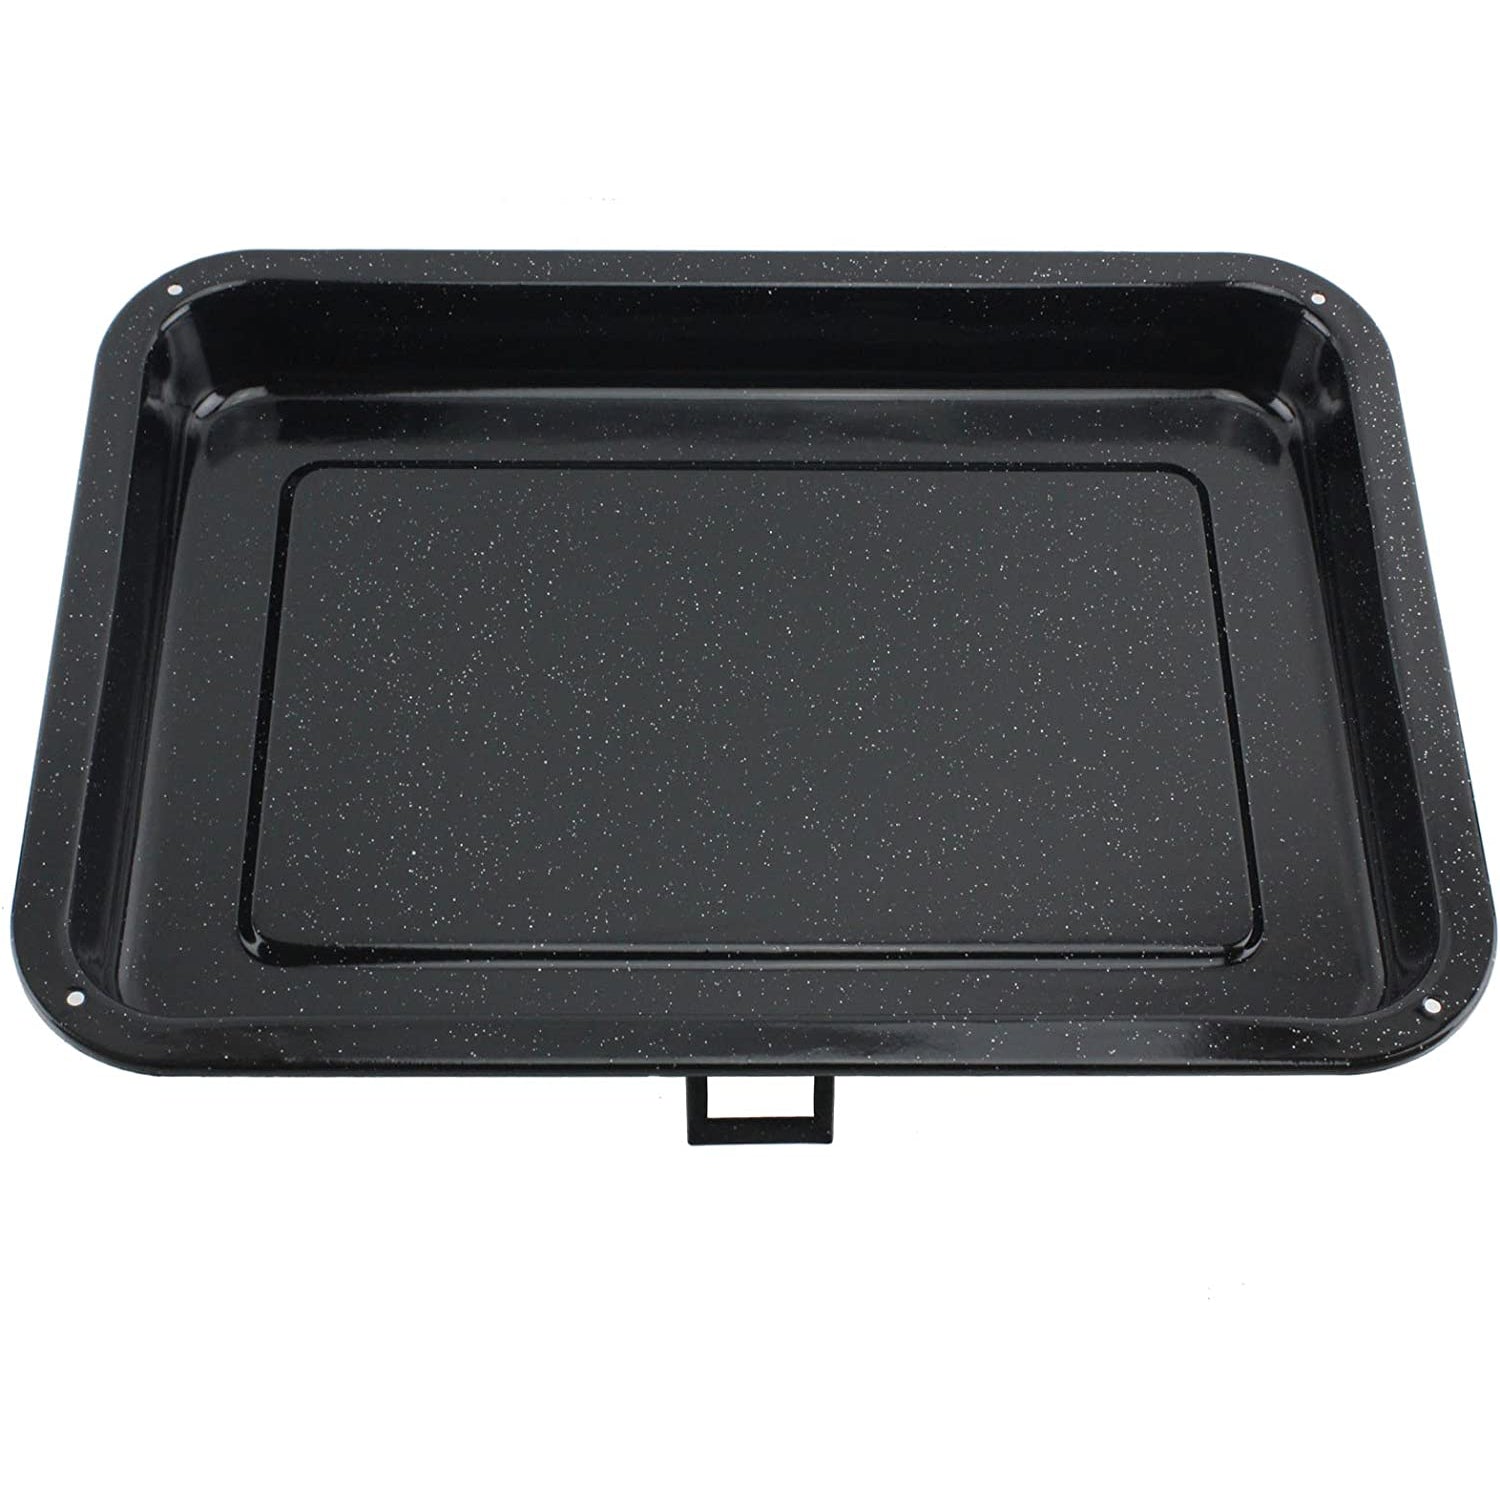 Small Grill Pan + Rack and Detachable Handle for DIPLOMAT Oven Cooker